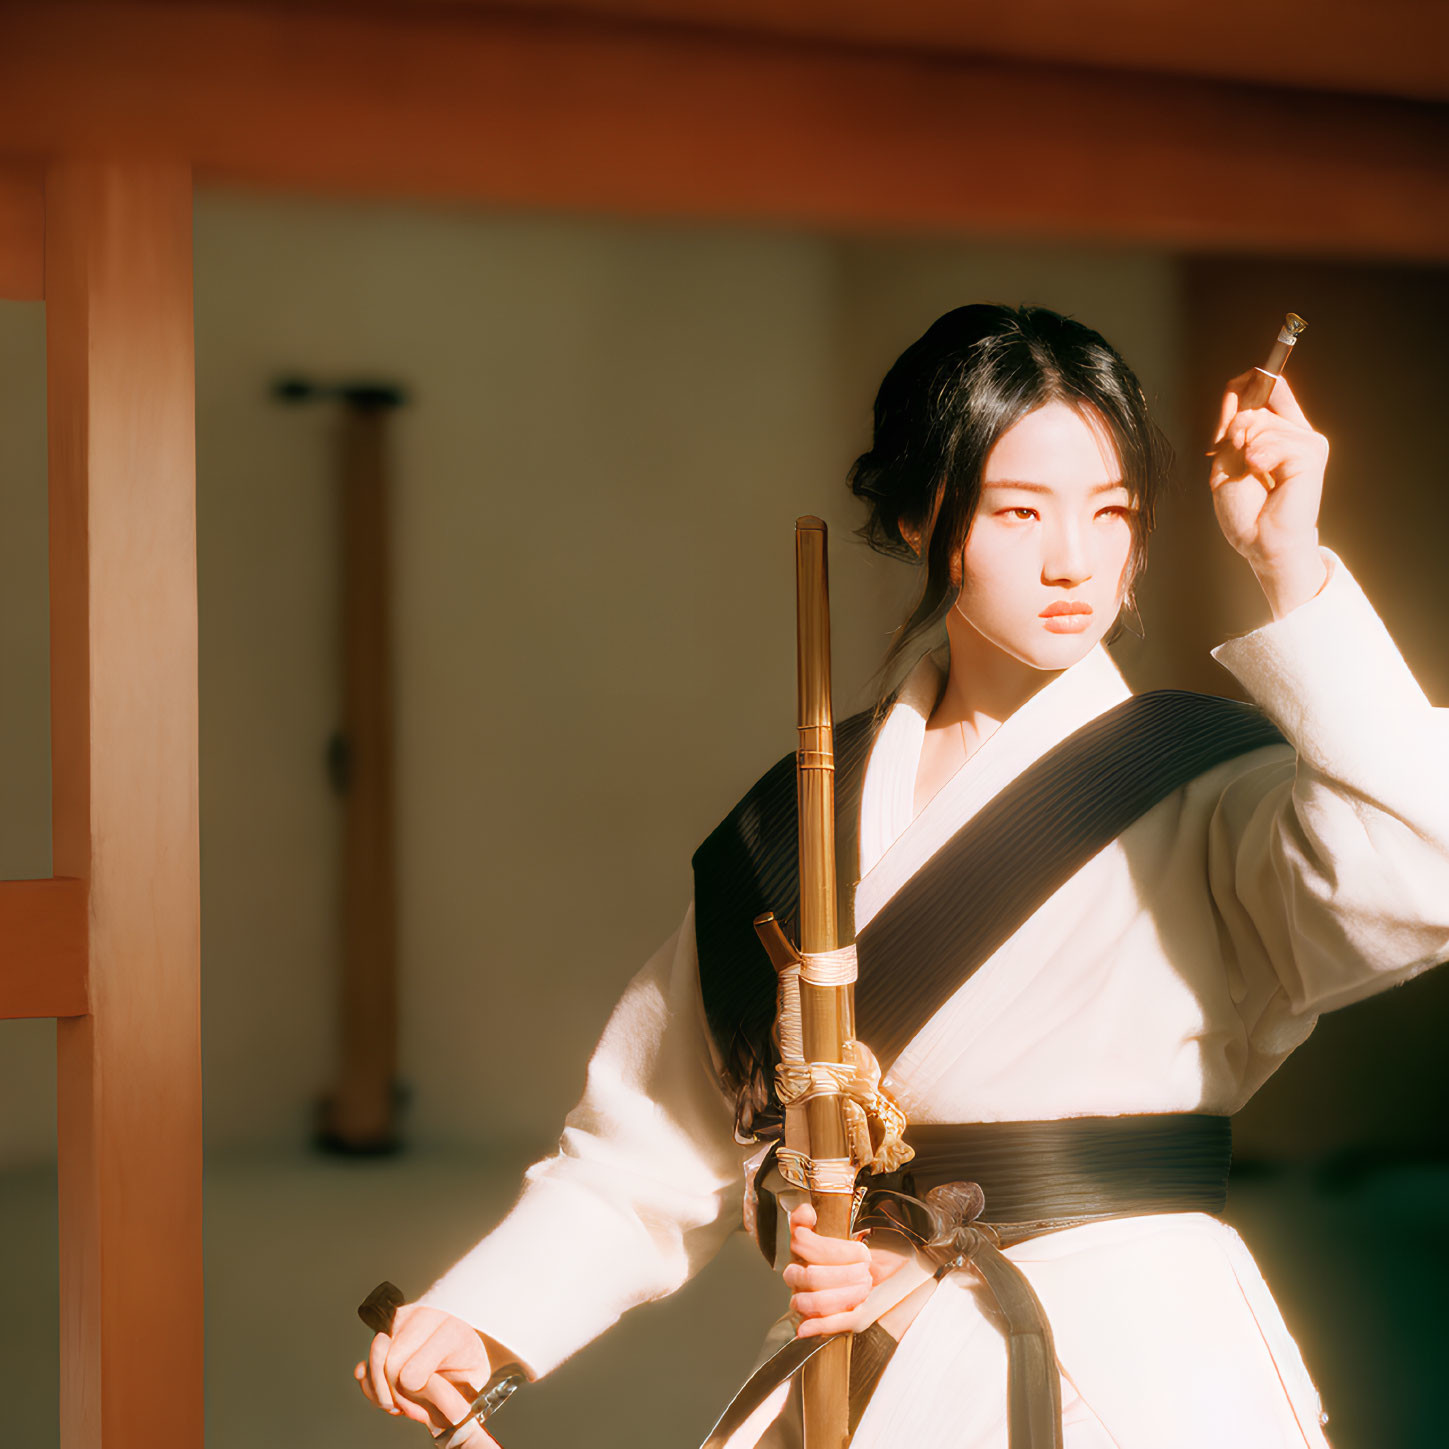 Traditional Attire Person with Sword in Sunlit Room